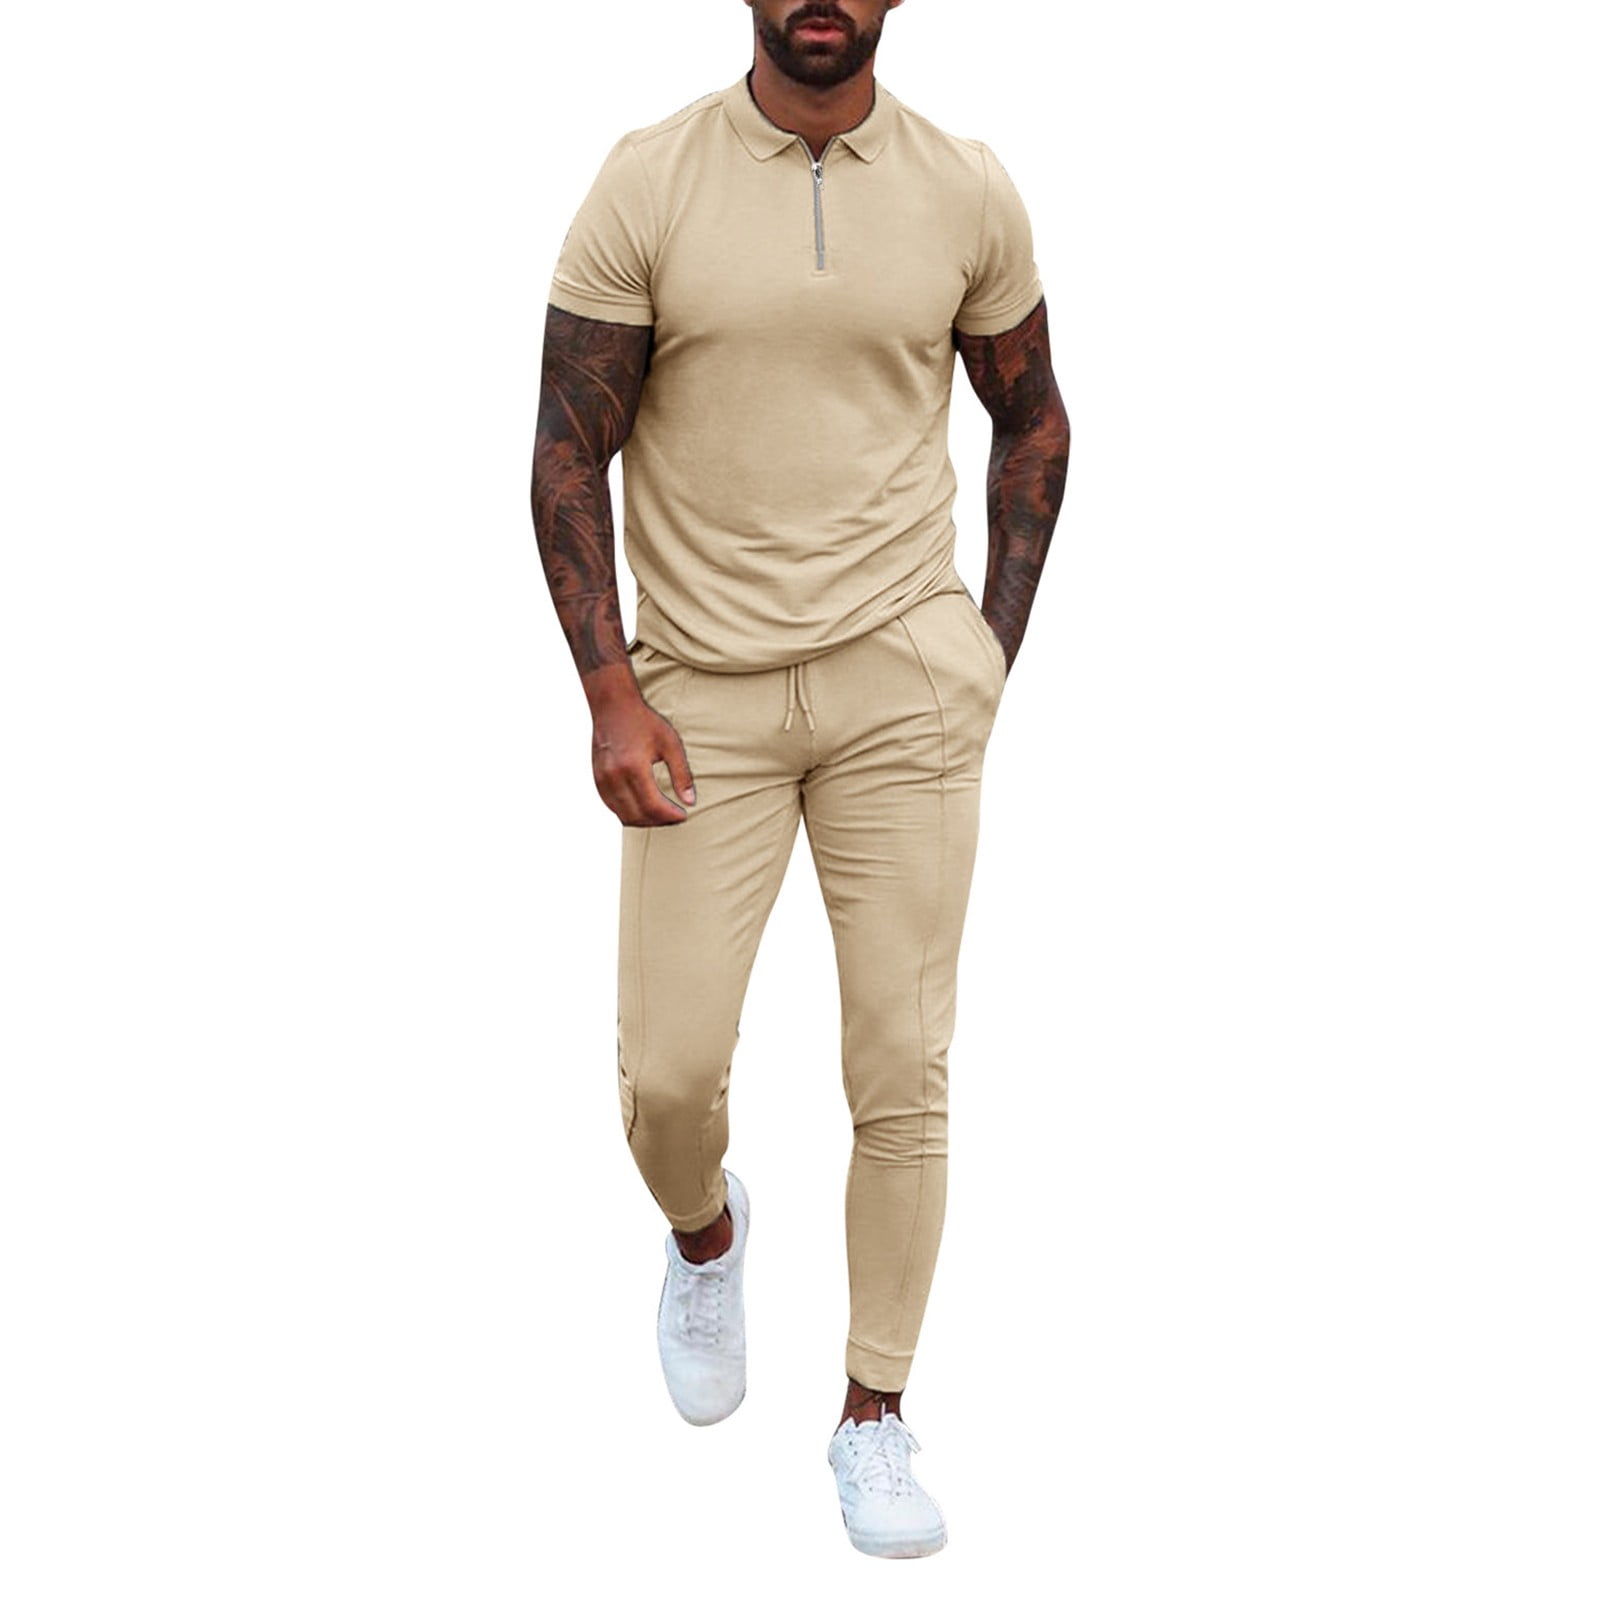 BSDHBS Outfits for Men Male Summer Top Shirt and Shorts Set 2 Piece Outfits  Fashion Casual Short Sleeve Tracksuit Set for Men Brown Size XXL 